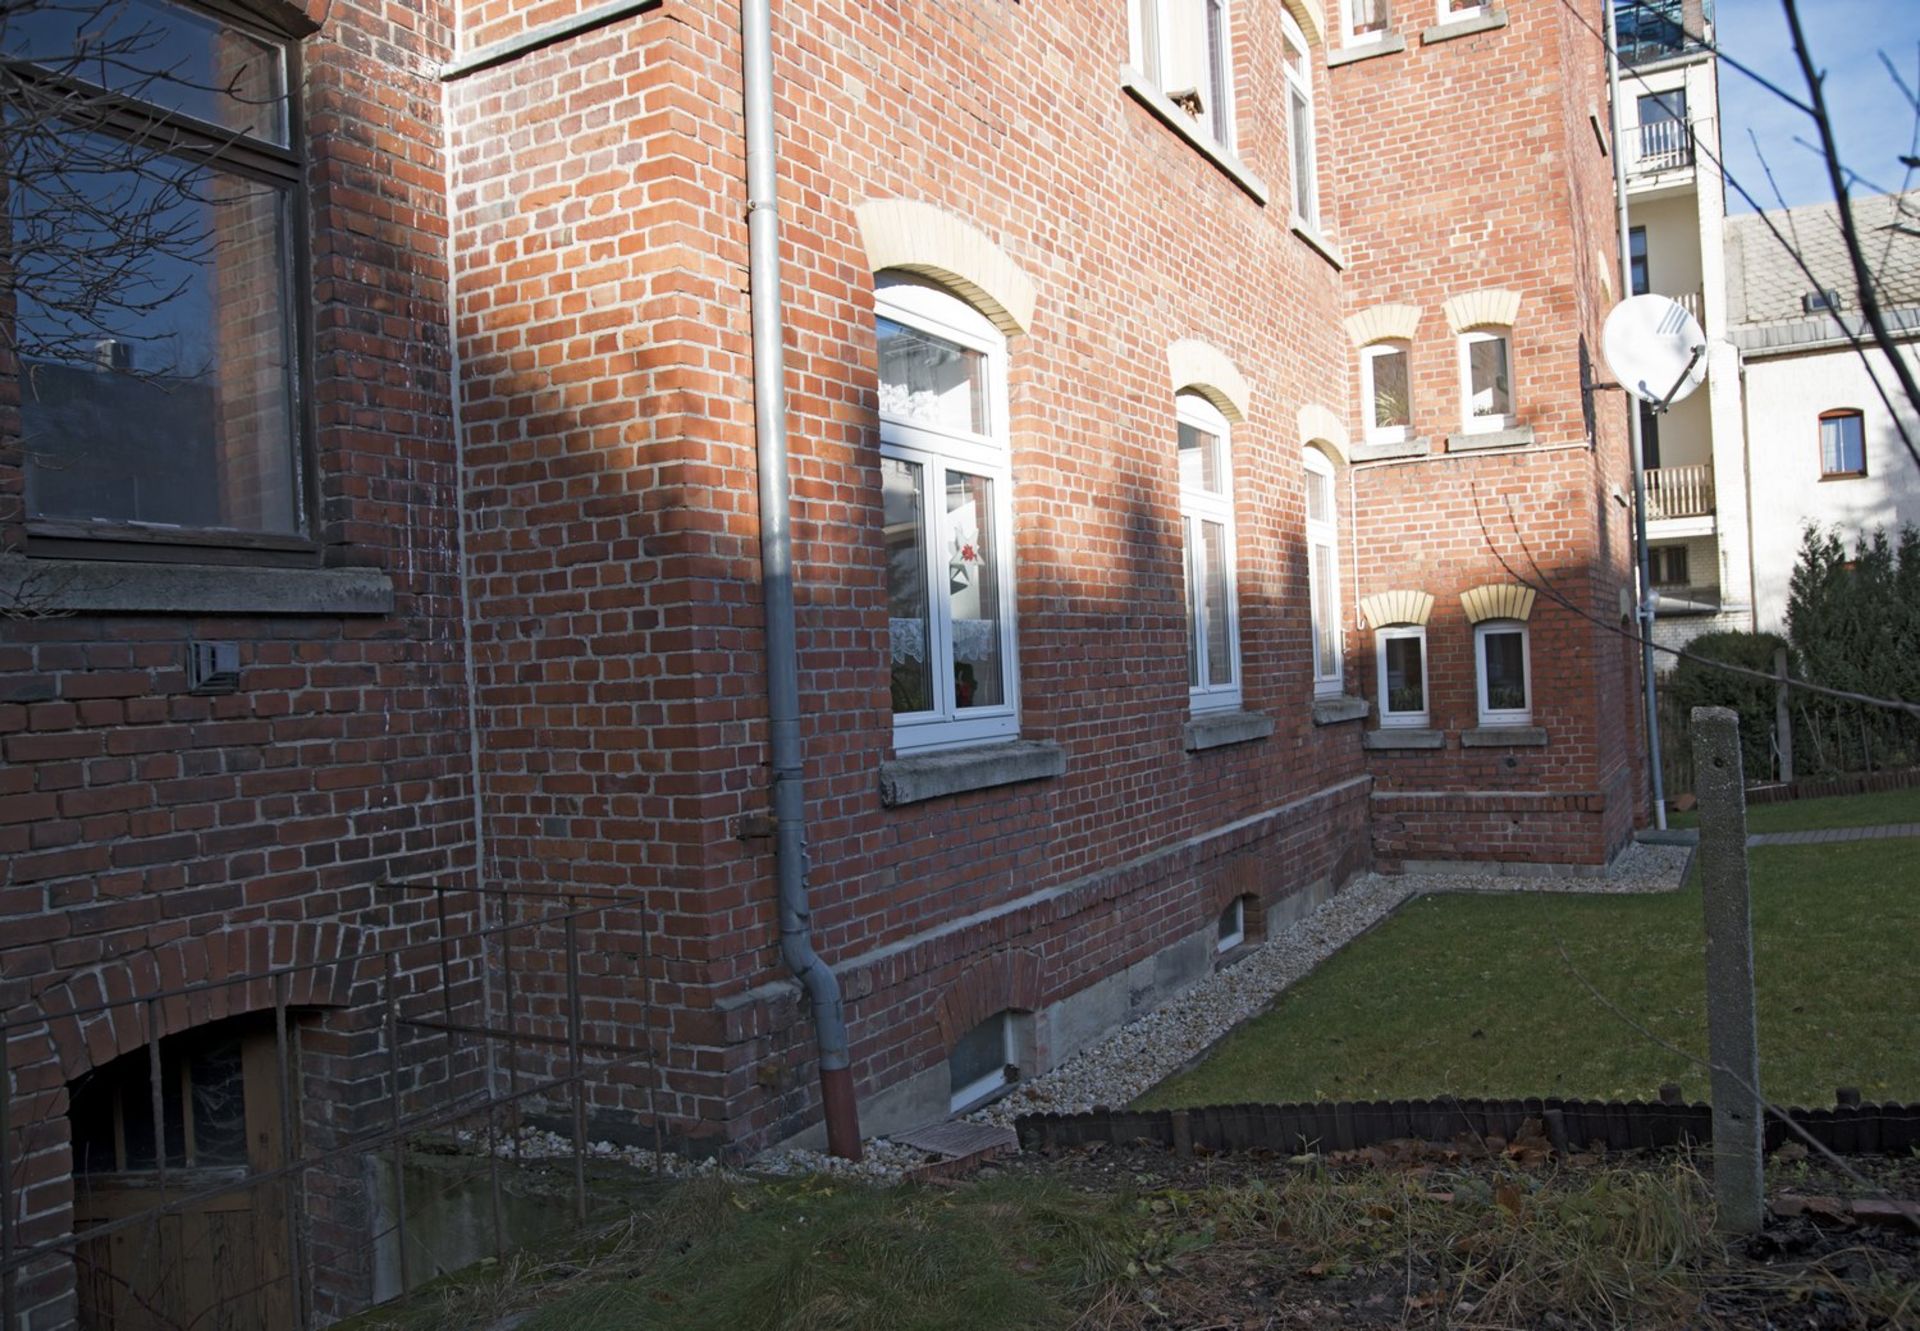 4 STOREY GERMANY APARTMENT BLOCK IN ADDITION TO A FULL BASEMENT + HUGE ATTIC! - Image 60 of 76